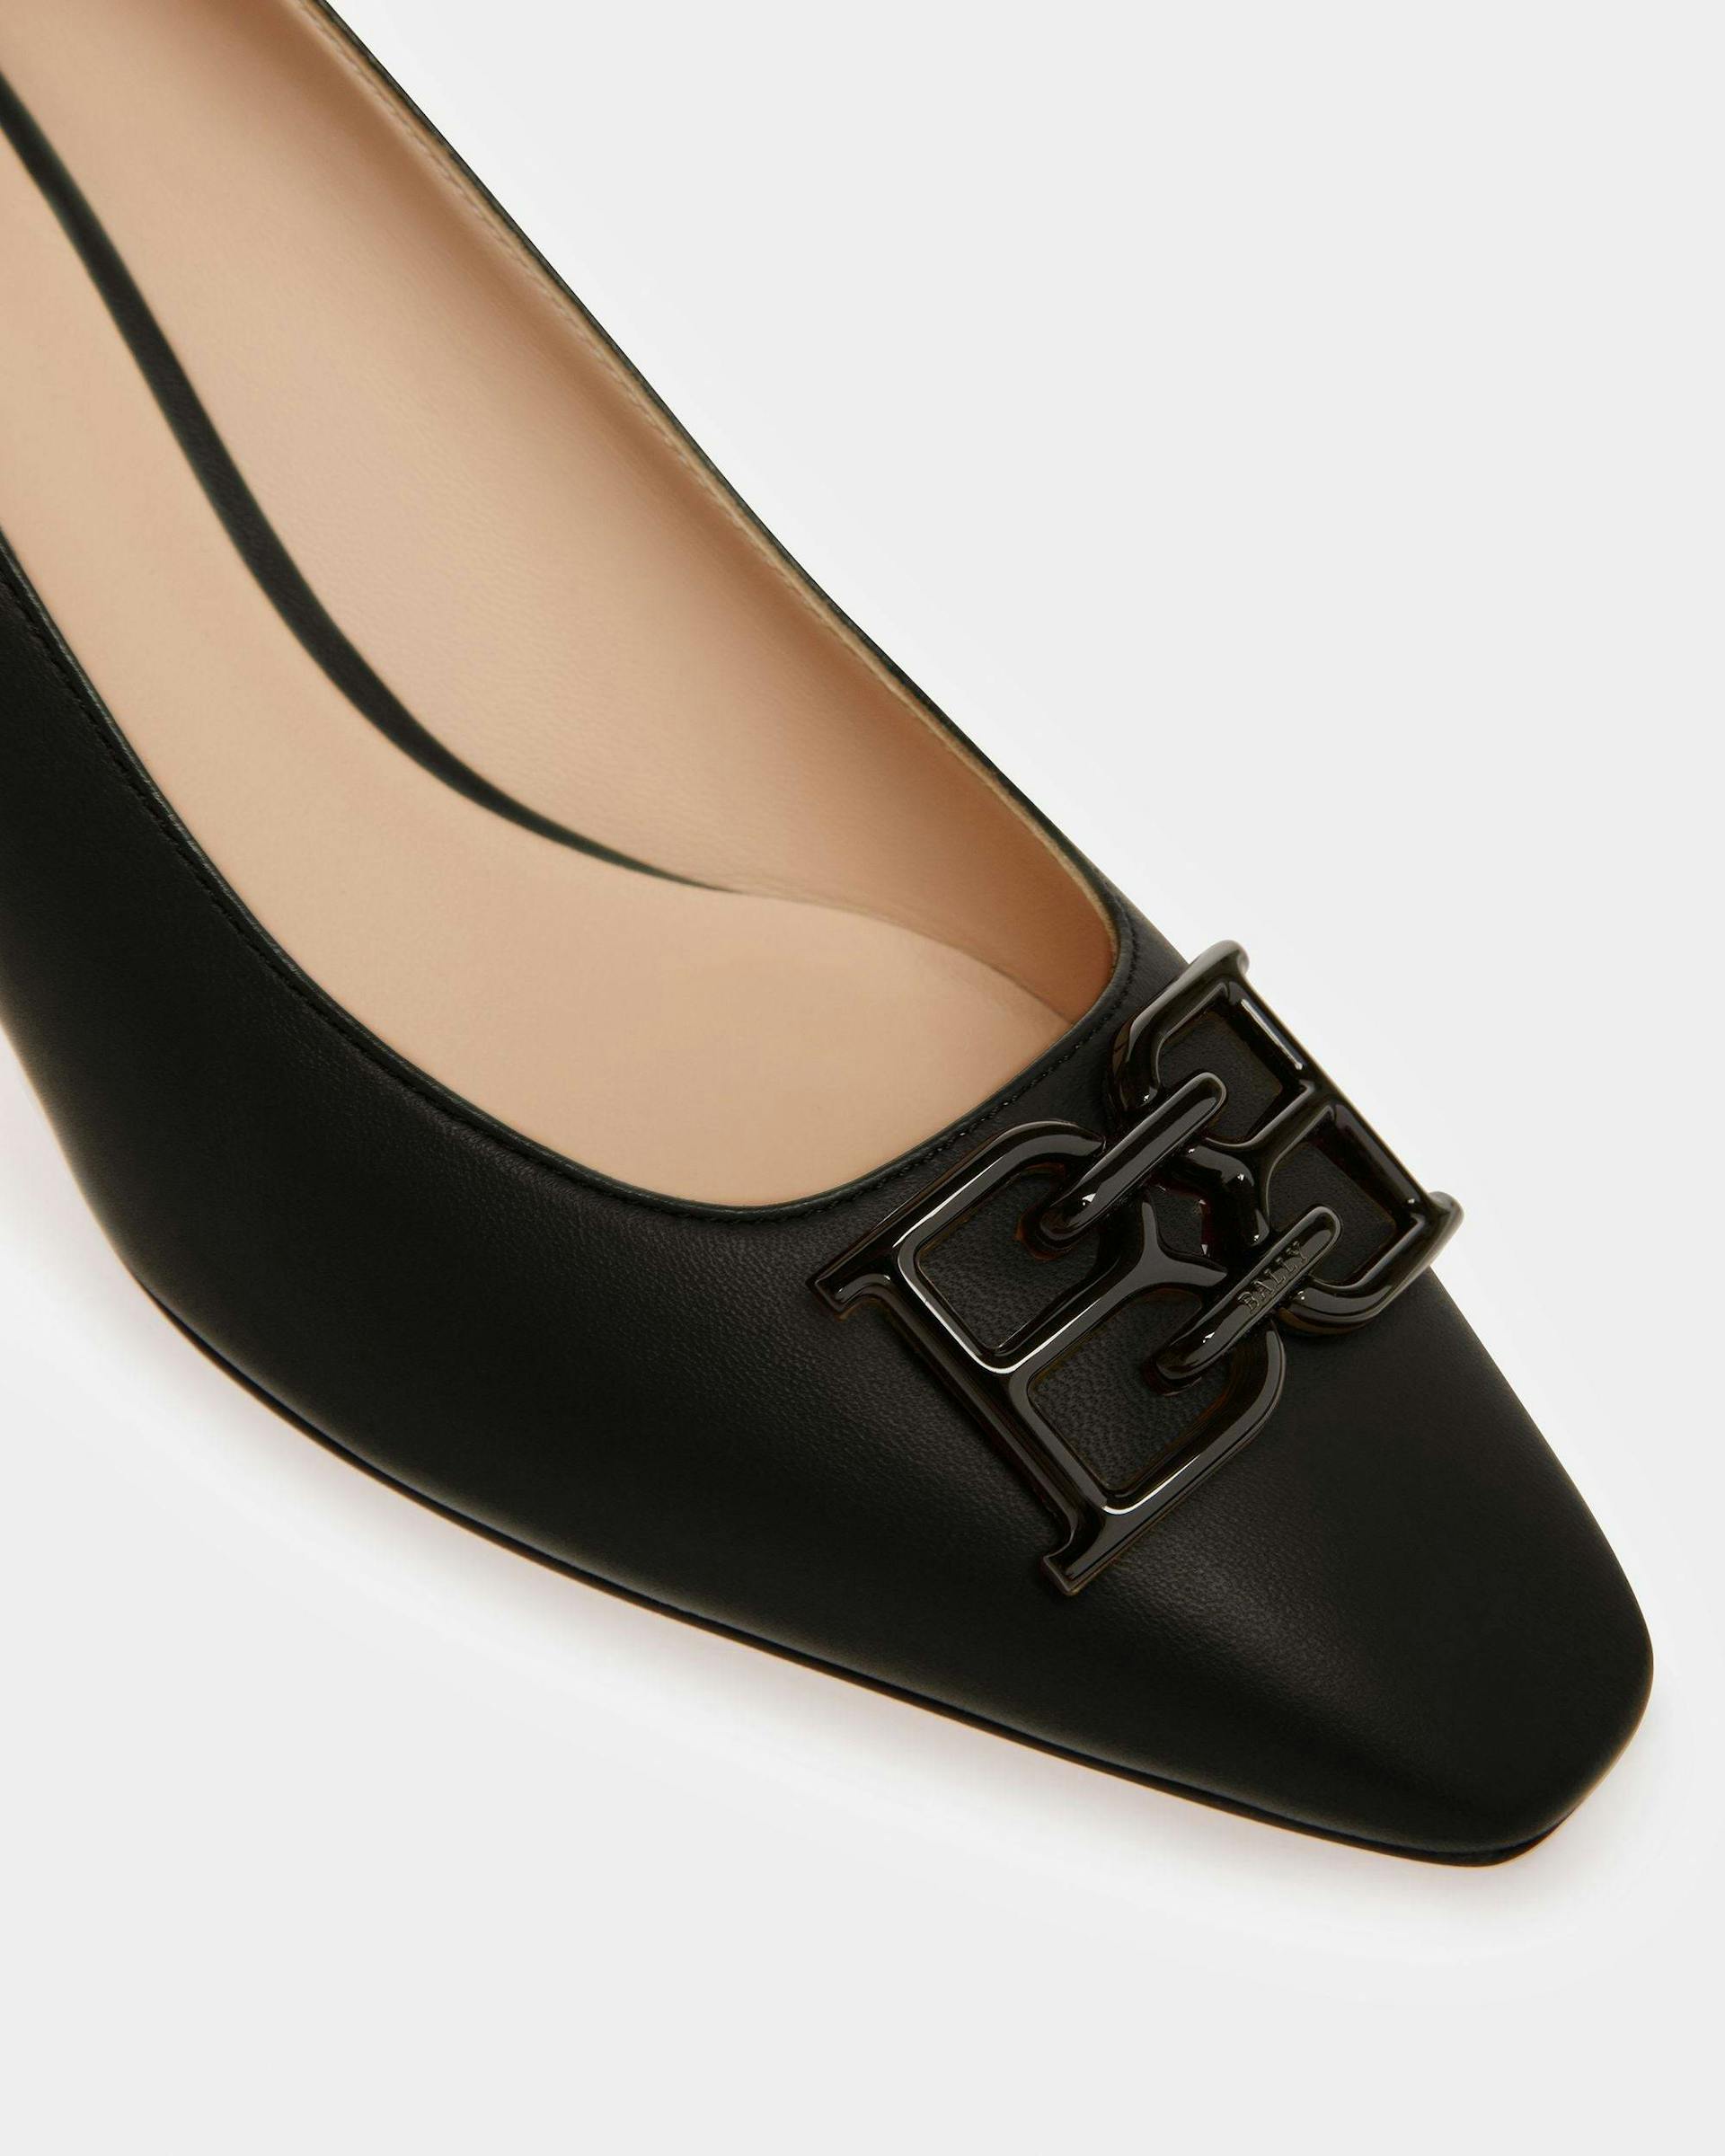 Evanca Leather Pumps In Black - Women's - Bally - 04